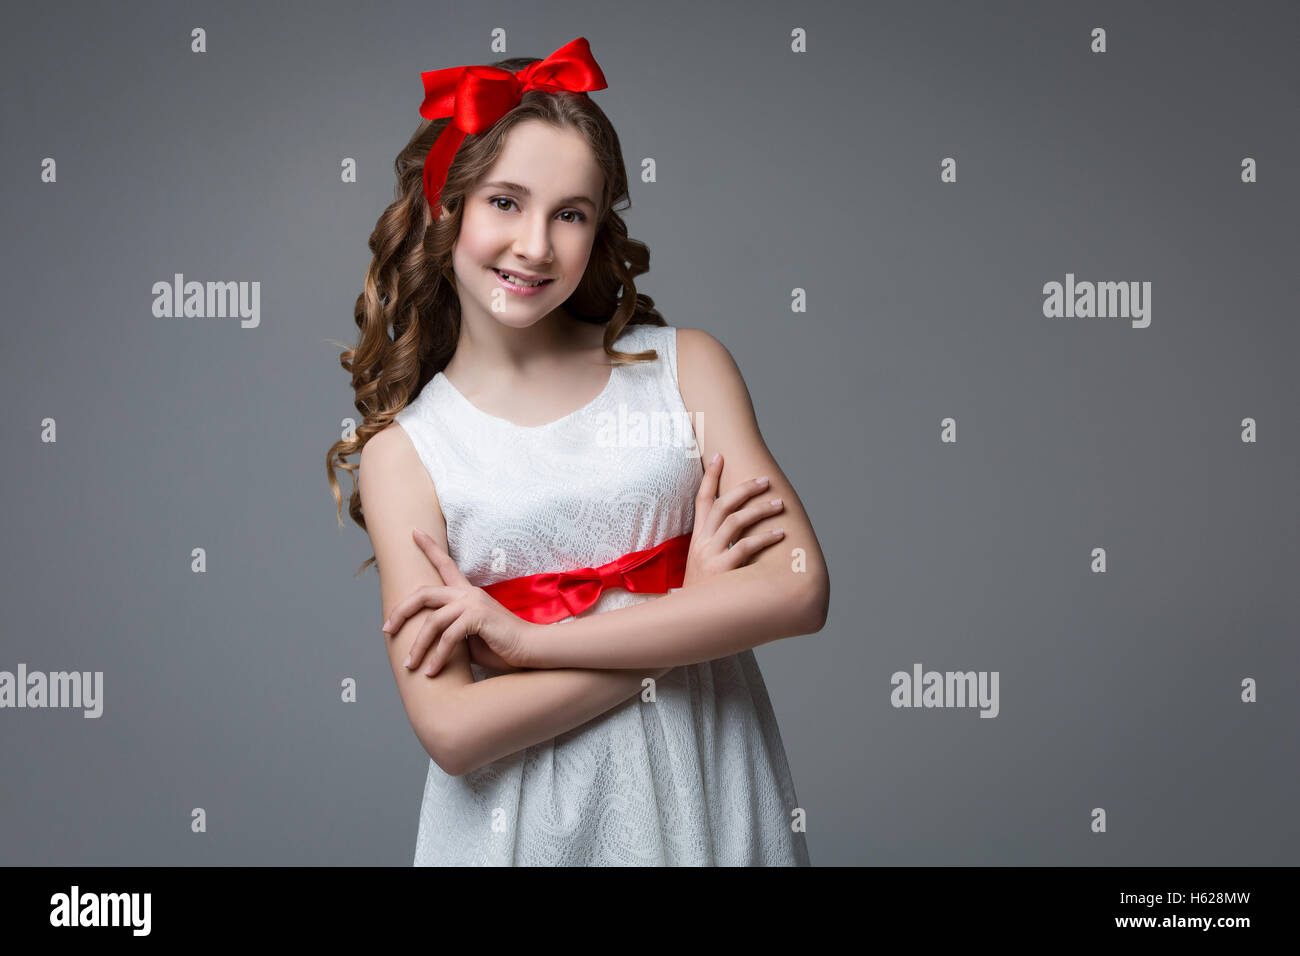 Teen girl with red bow on head Stock Photo